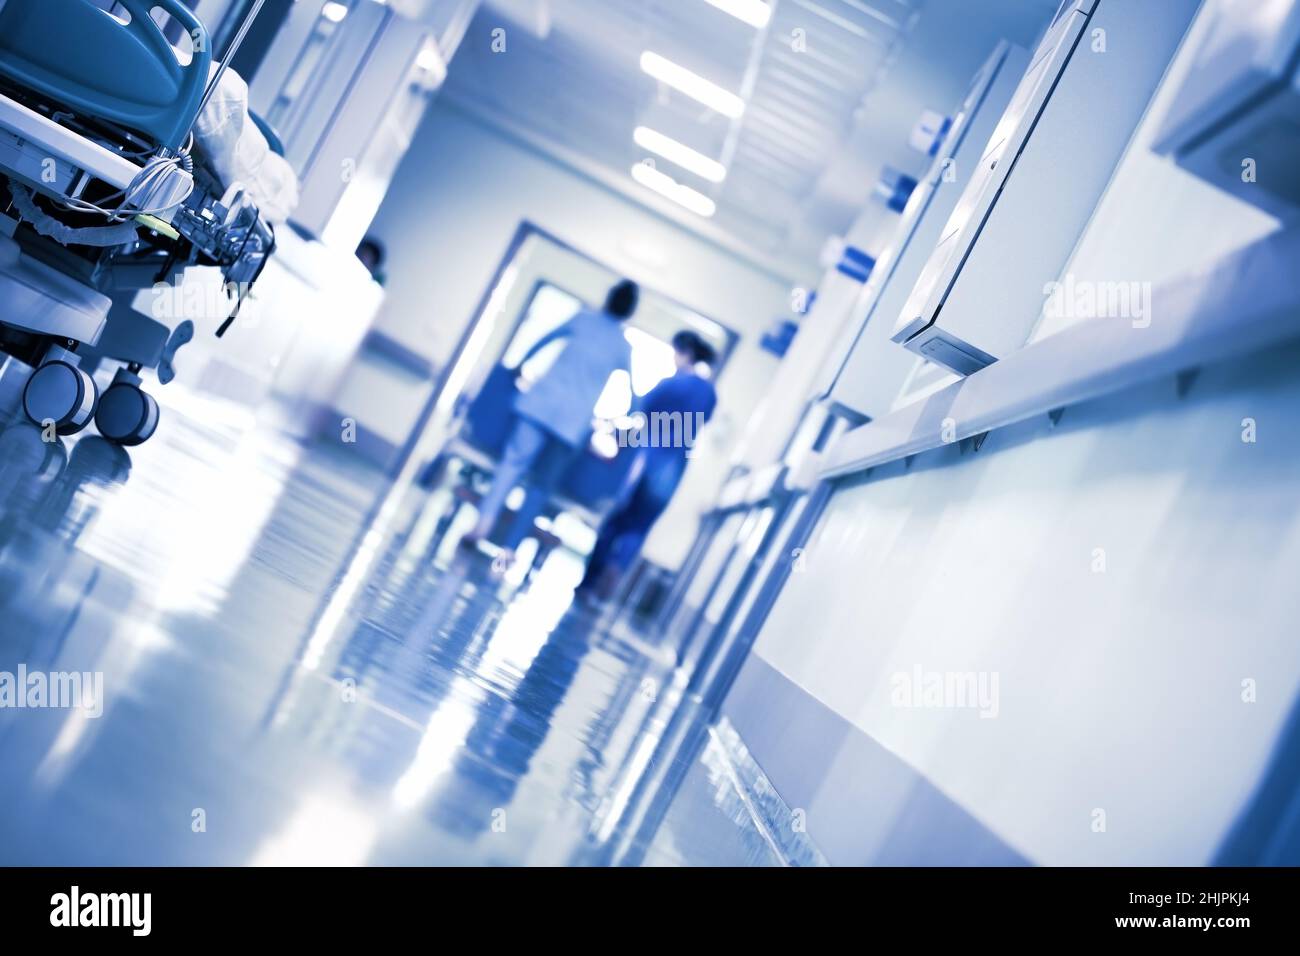 Working people in the hospital hallway. Stock Photo